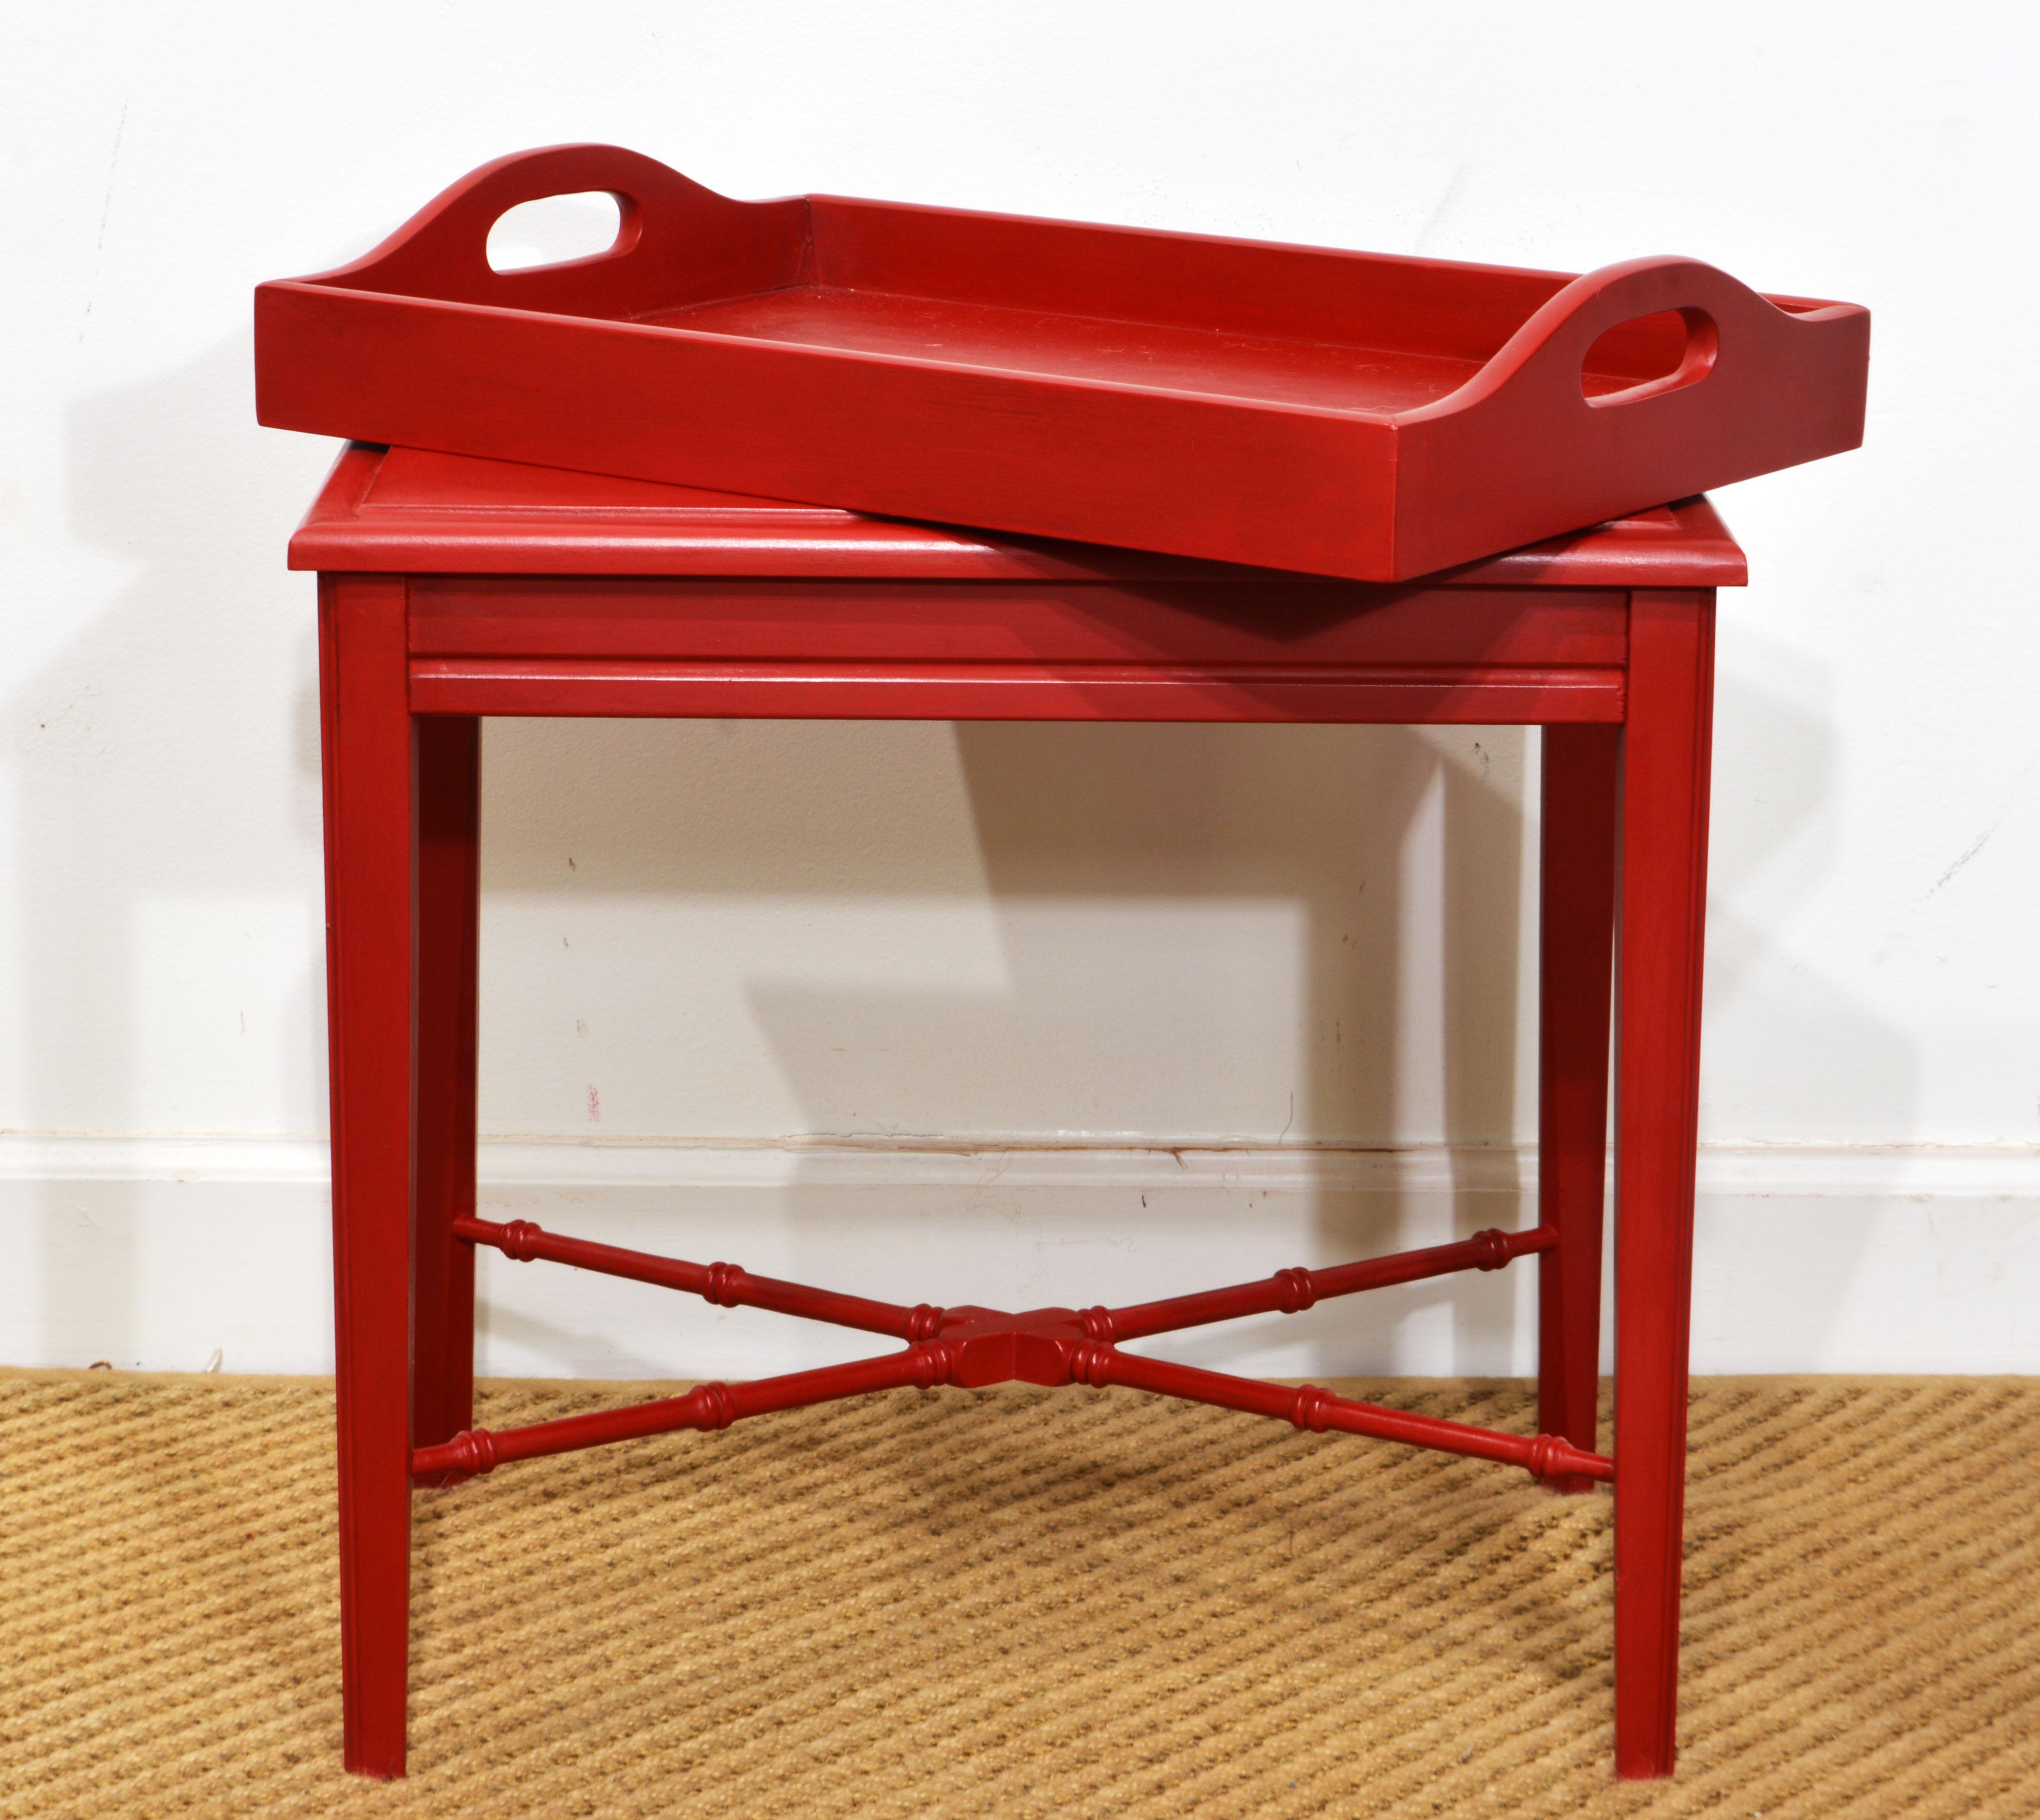 American Petite Vintage Regency Style Venetian Red Lacquered Butlers Lift Off Tray Table